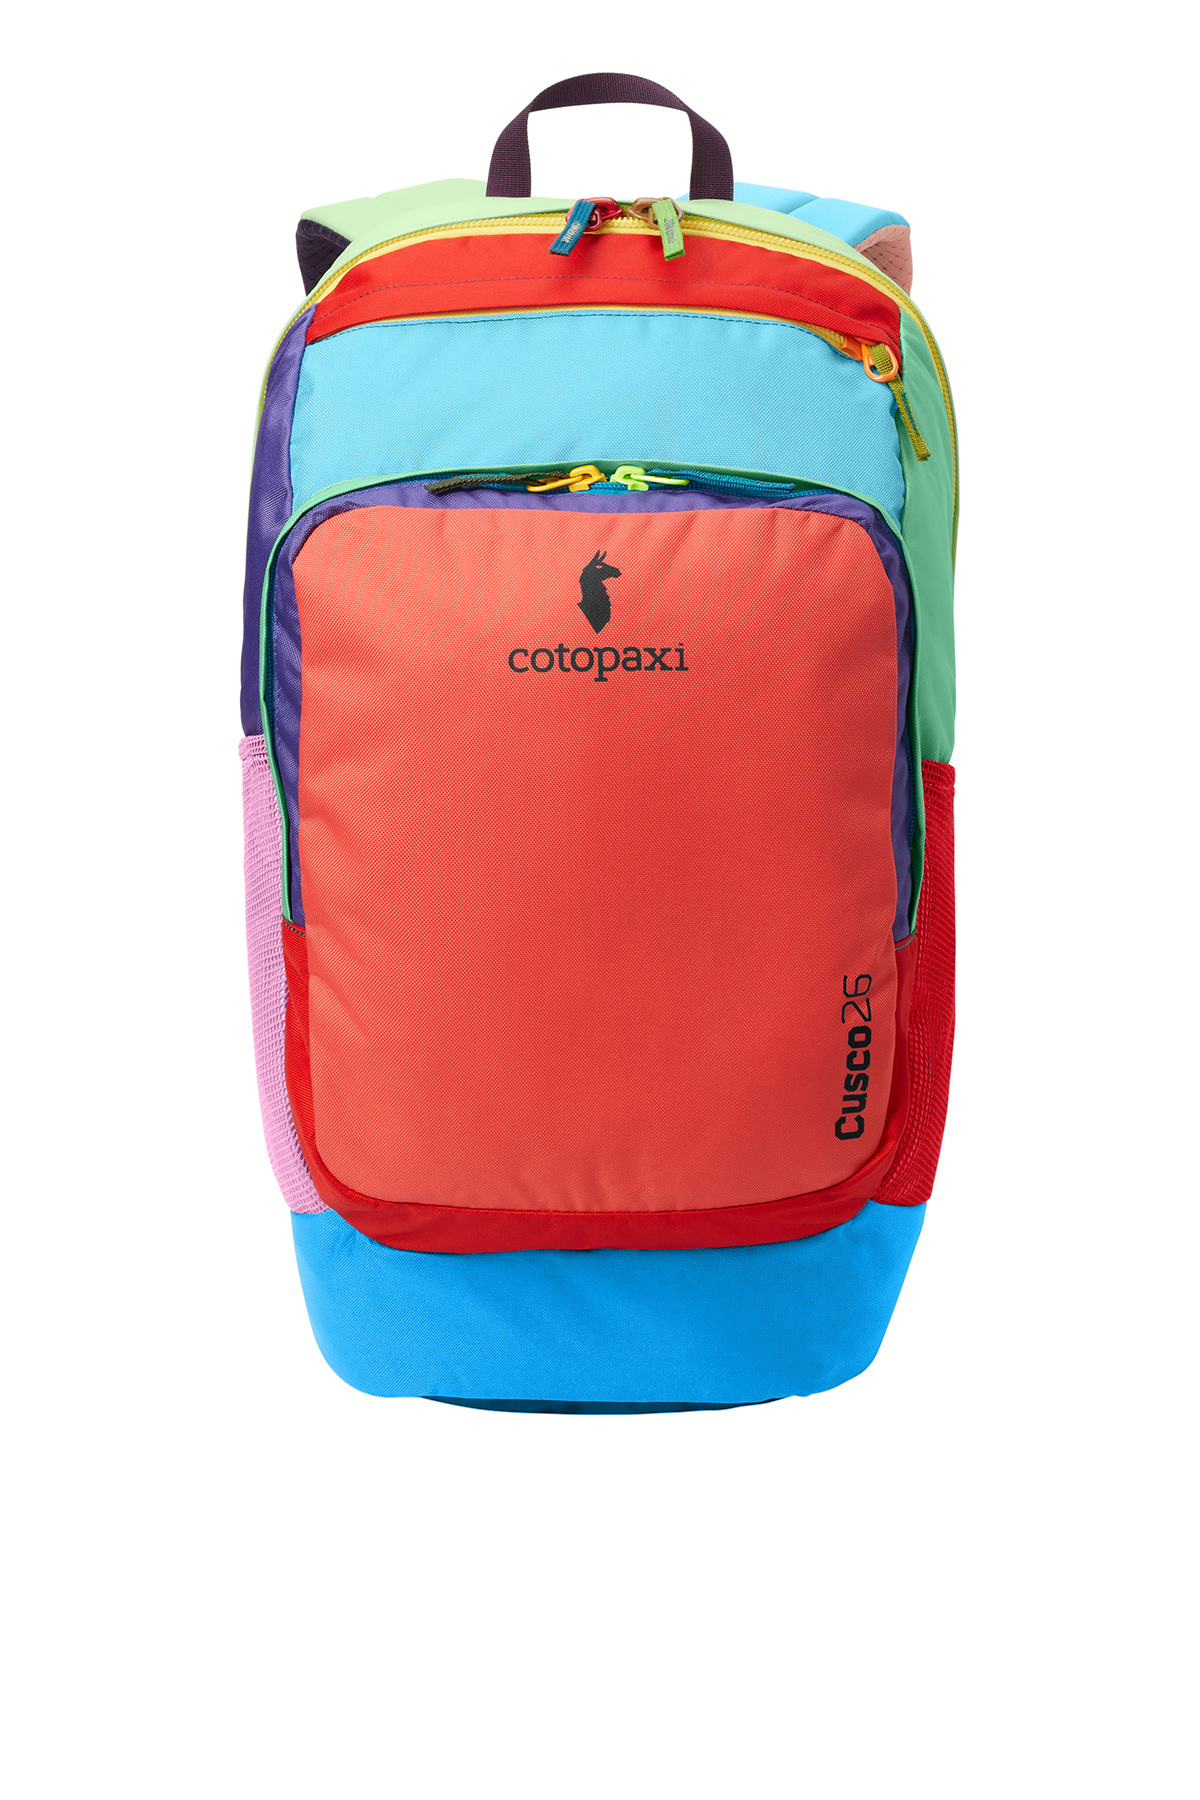 Cotopaxi Cusco 26L Backpack | Product | SanMar